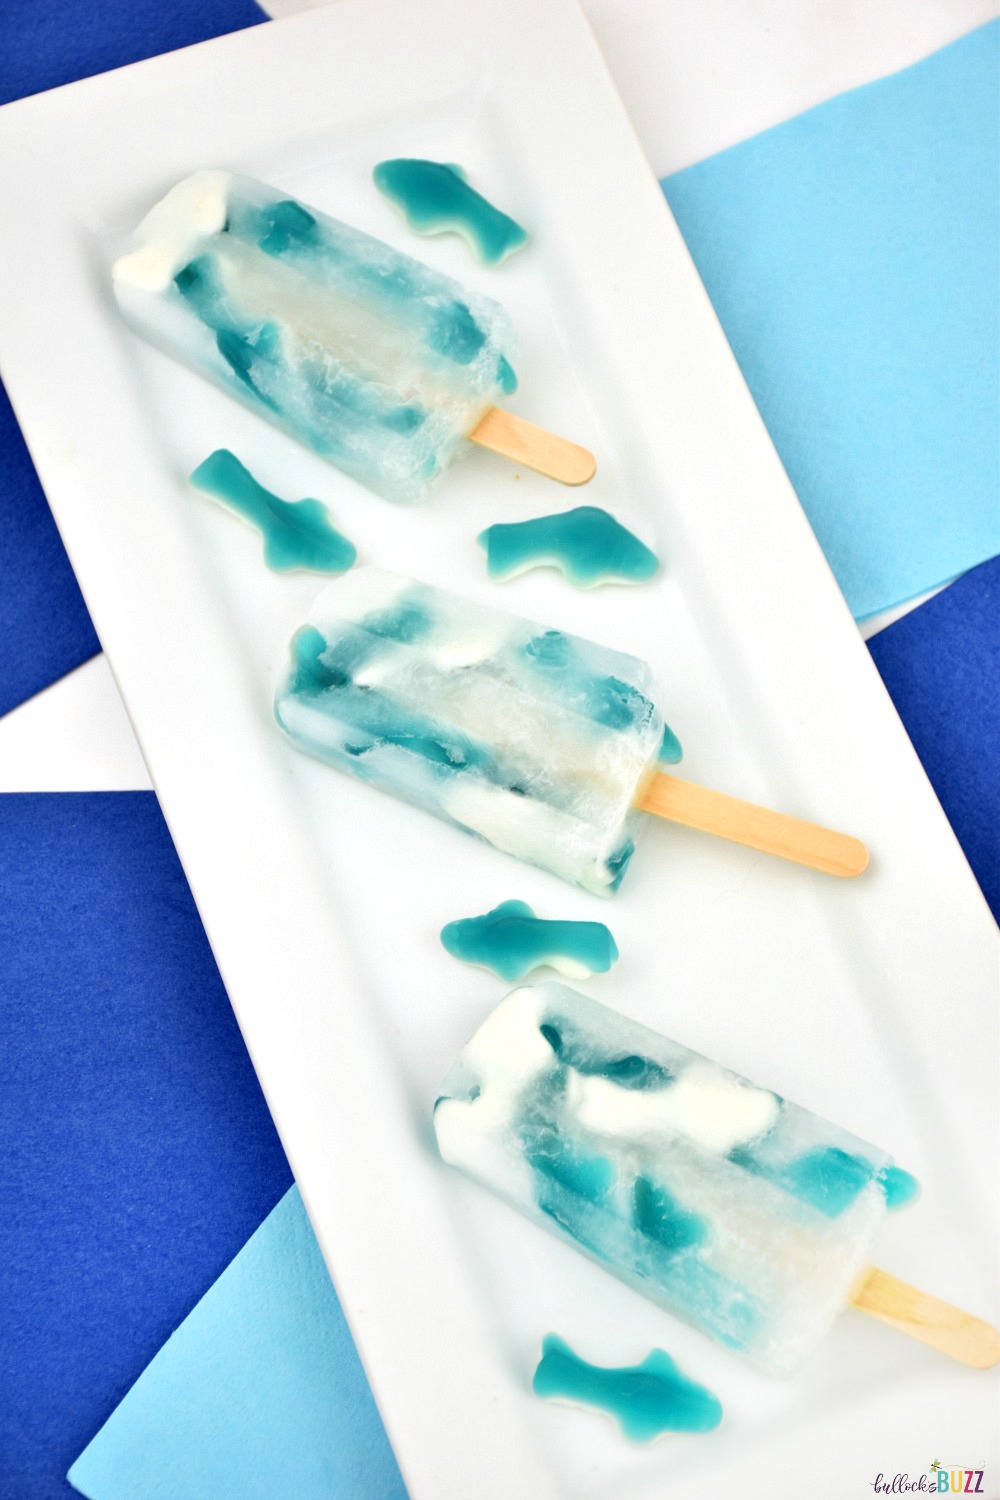 This Sprite and gummy shark popsicle recipe is a fearsomely perfect shark-themed treat for Shark Week or an ocean-themed party! These Great White Gummy Shark Popsicles are easy-to-make, too!